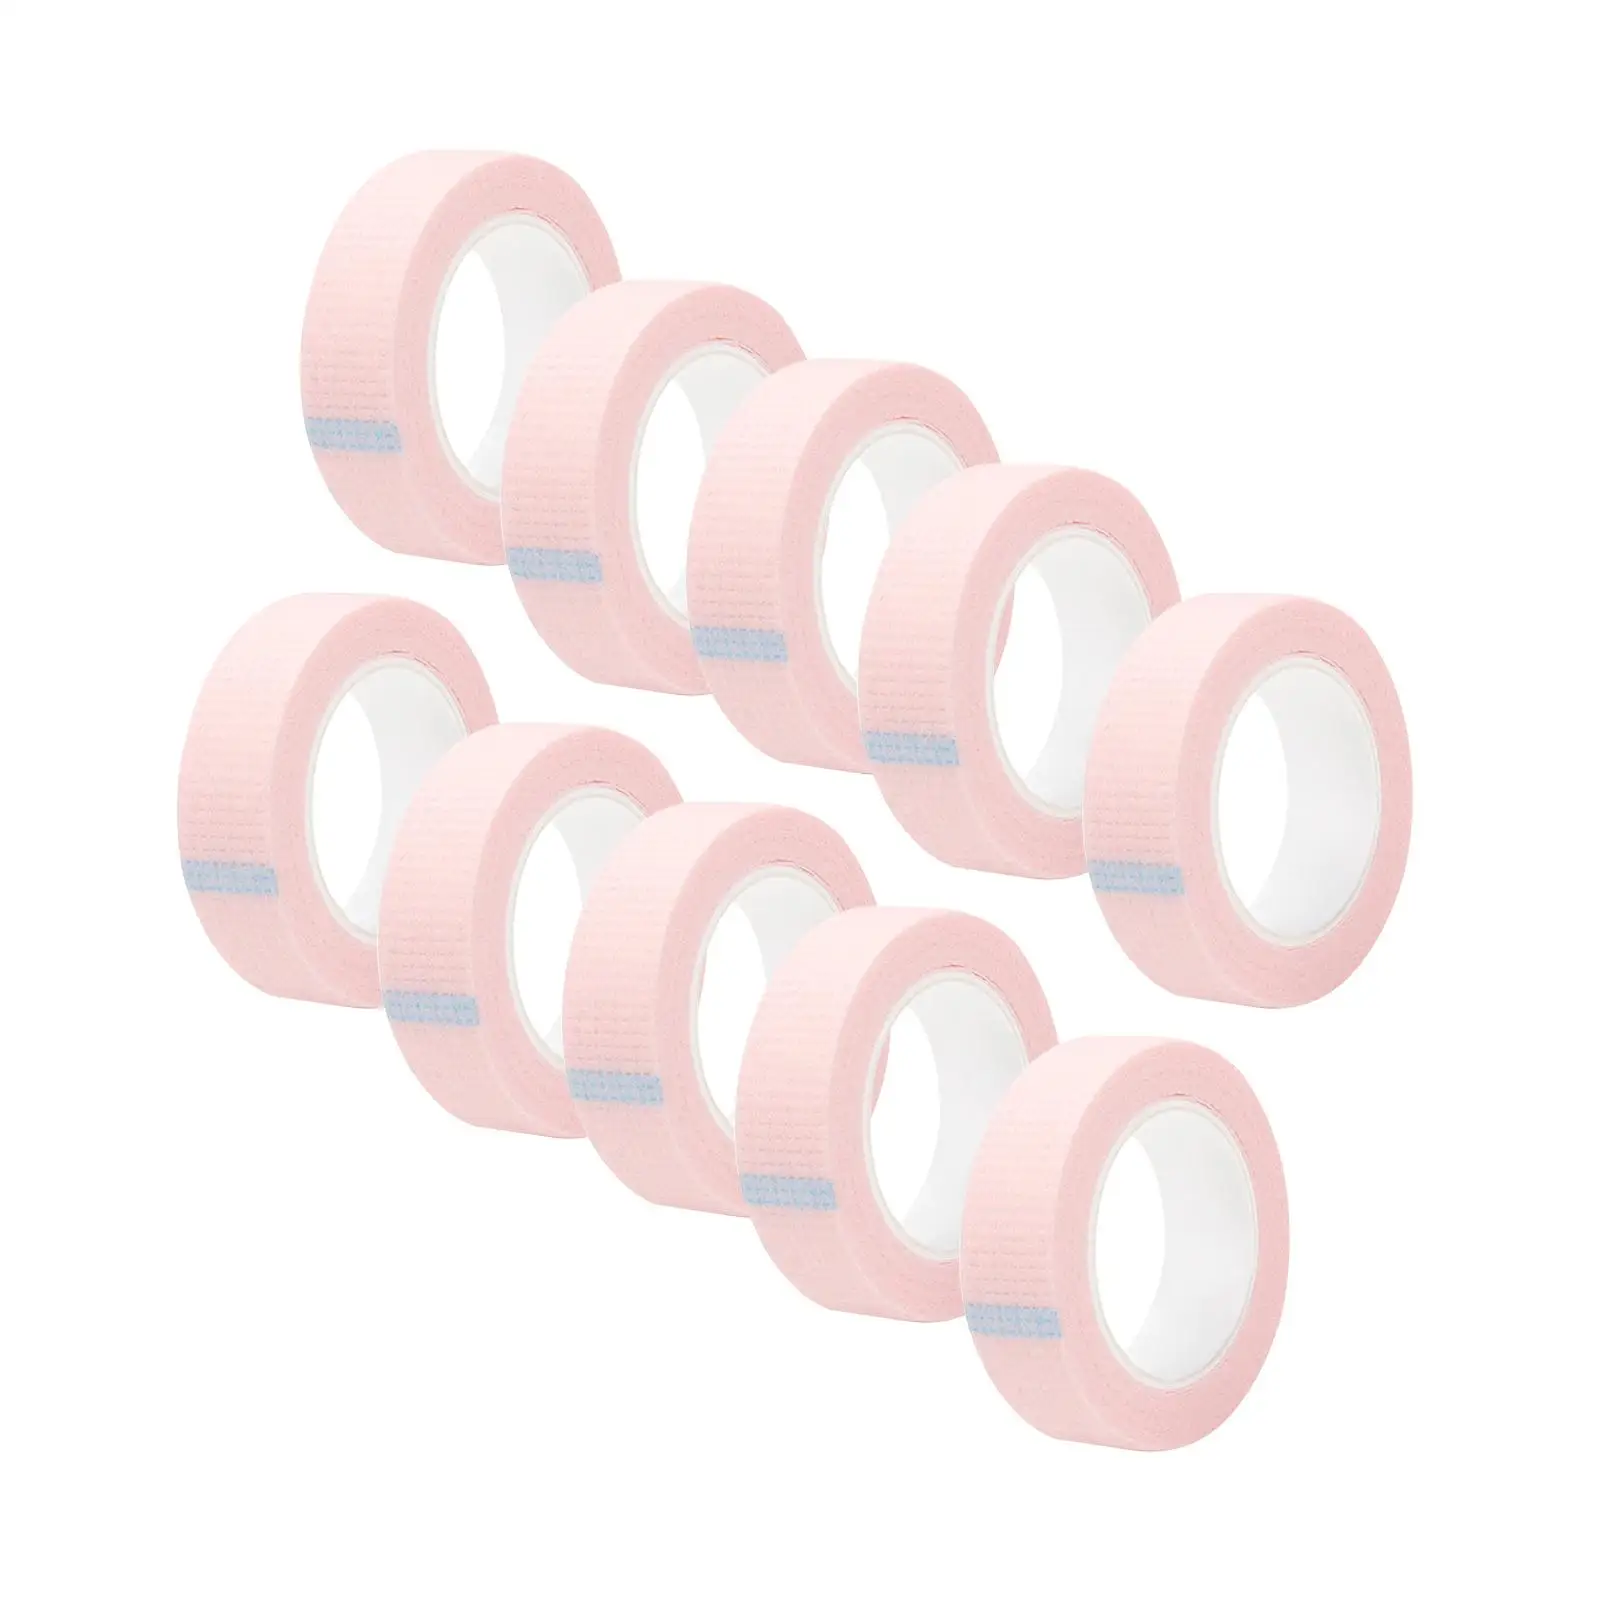 10x Eyelash Extension Tapes under Eye Tape Eyelash Extension Supplies for Personal Use Makeup Salons Professional Artists Girls